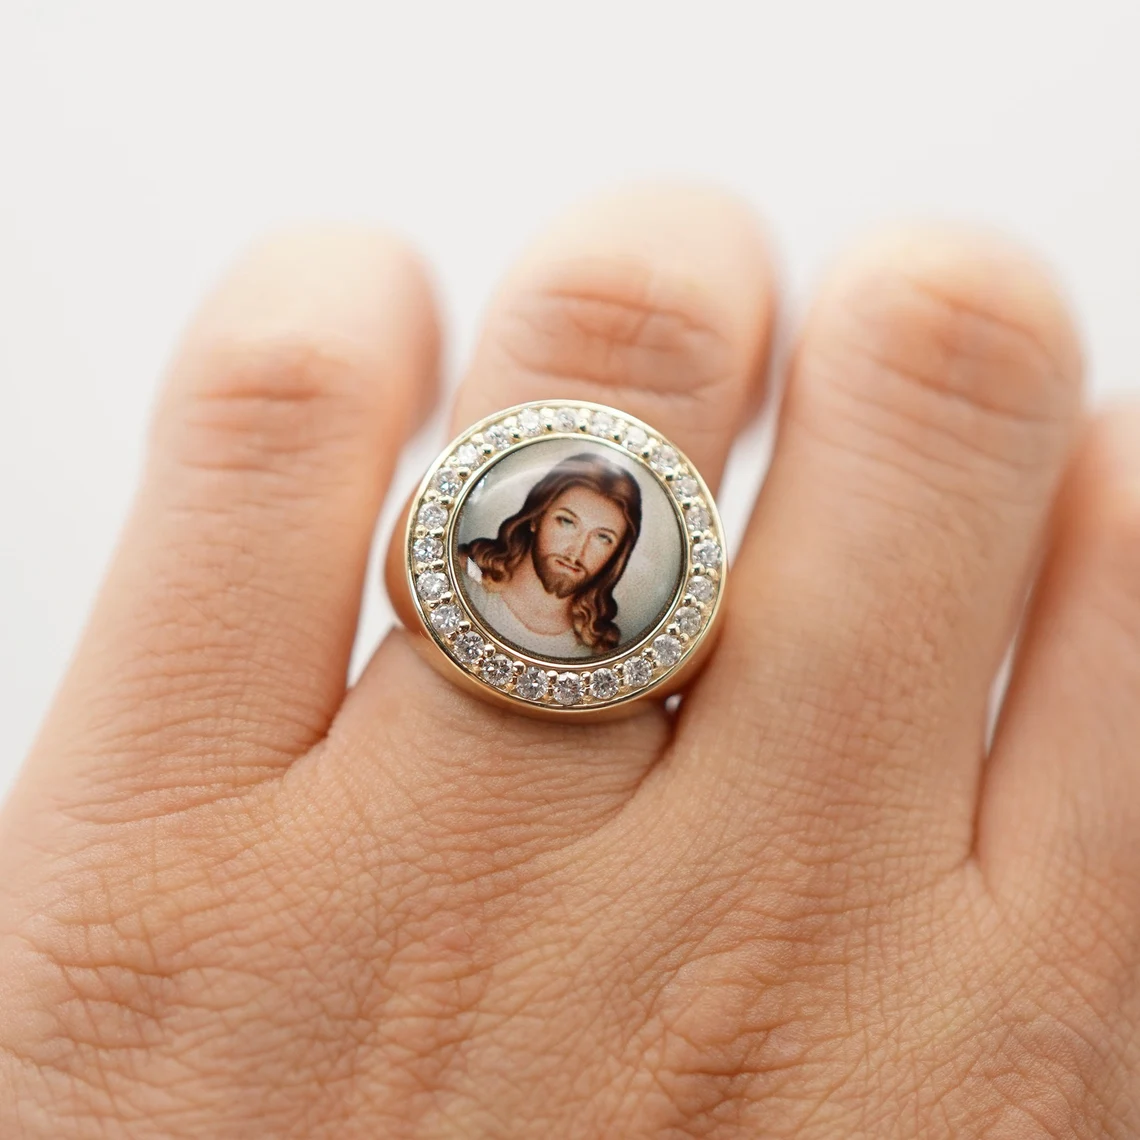 Round Ring with Picture Inside Gold Plated Personalized Custom Photo Ring